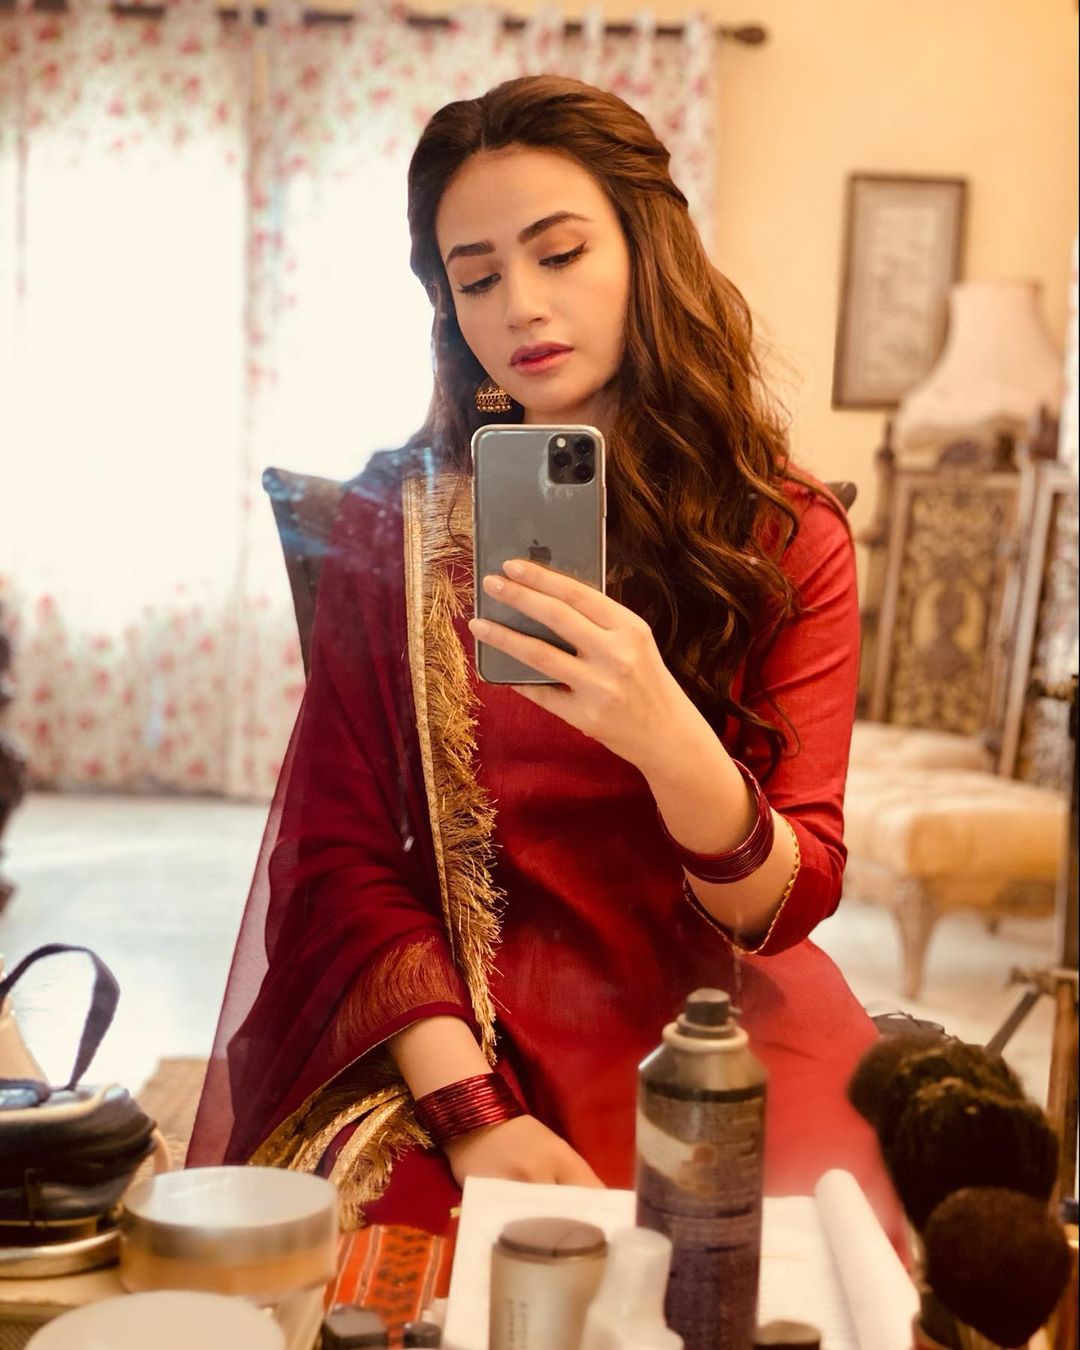 Latest Pictures of Sana Javed with her Husband Umair Jaswal